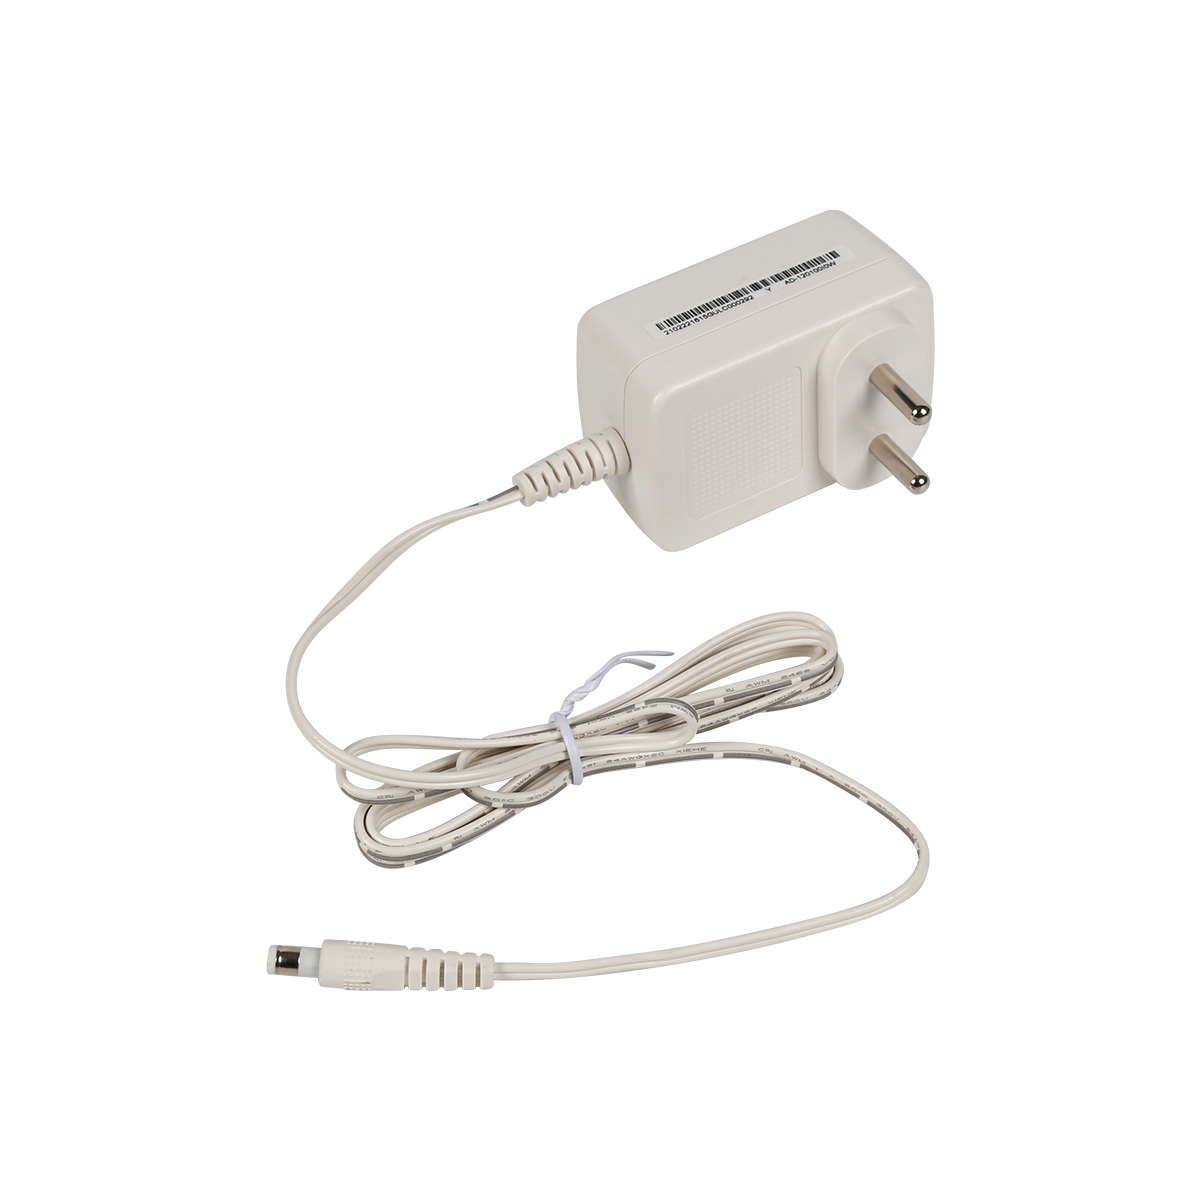 12W India white power supply 12v 5v  Adapter use for Audio-video and IT equipment